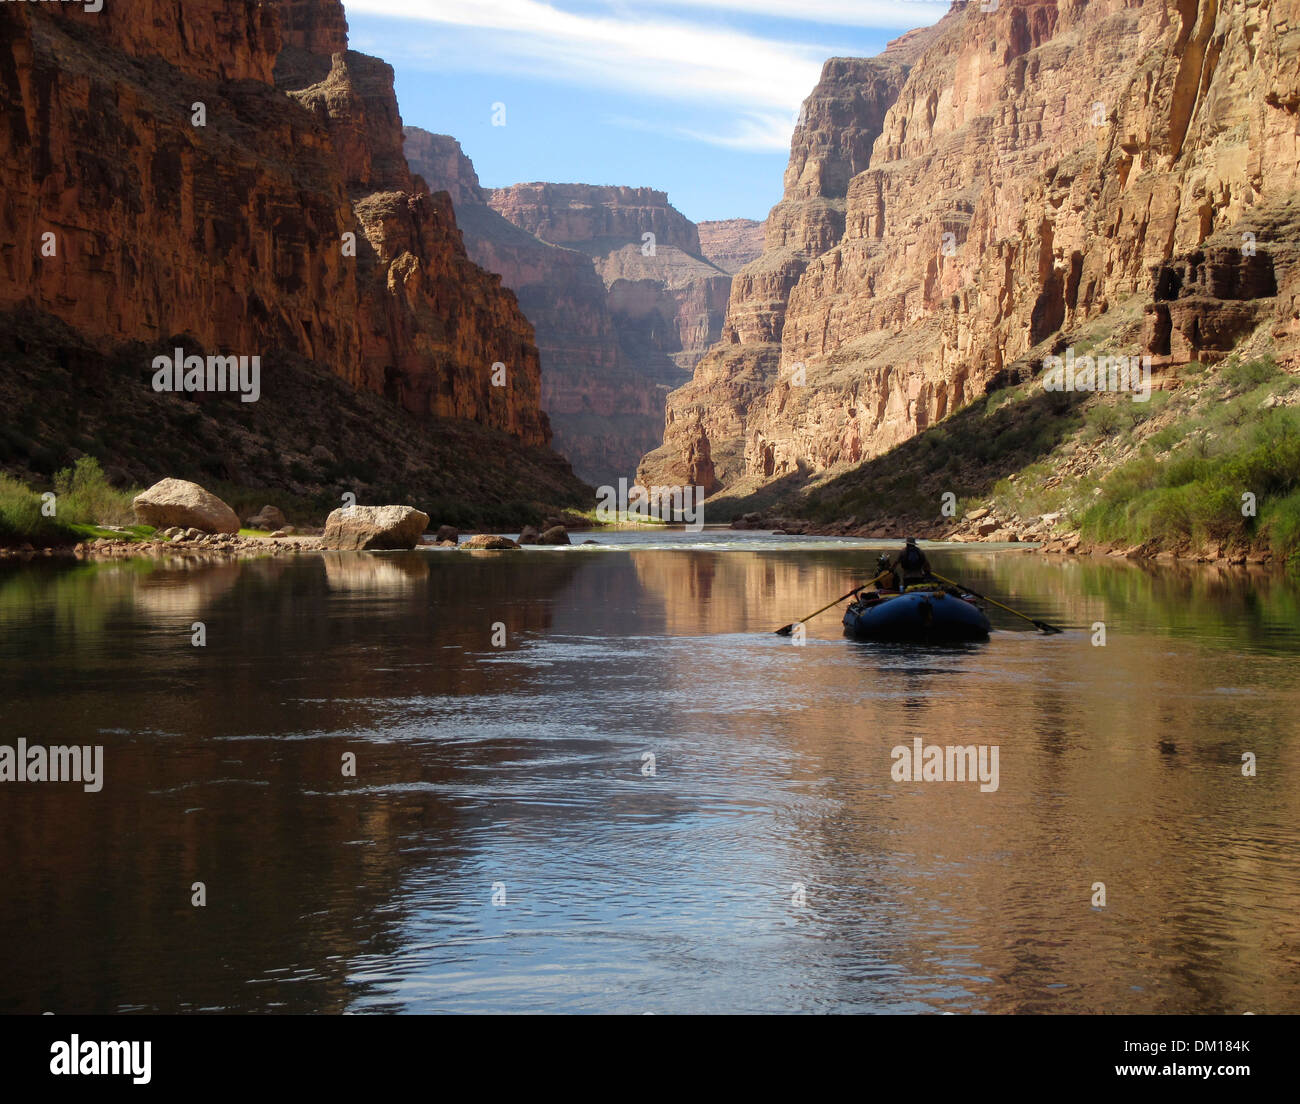 Lone raft in the Grand Canyon Stock Photo